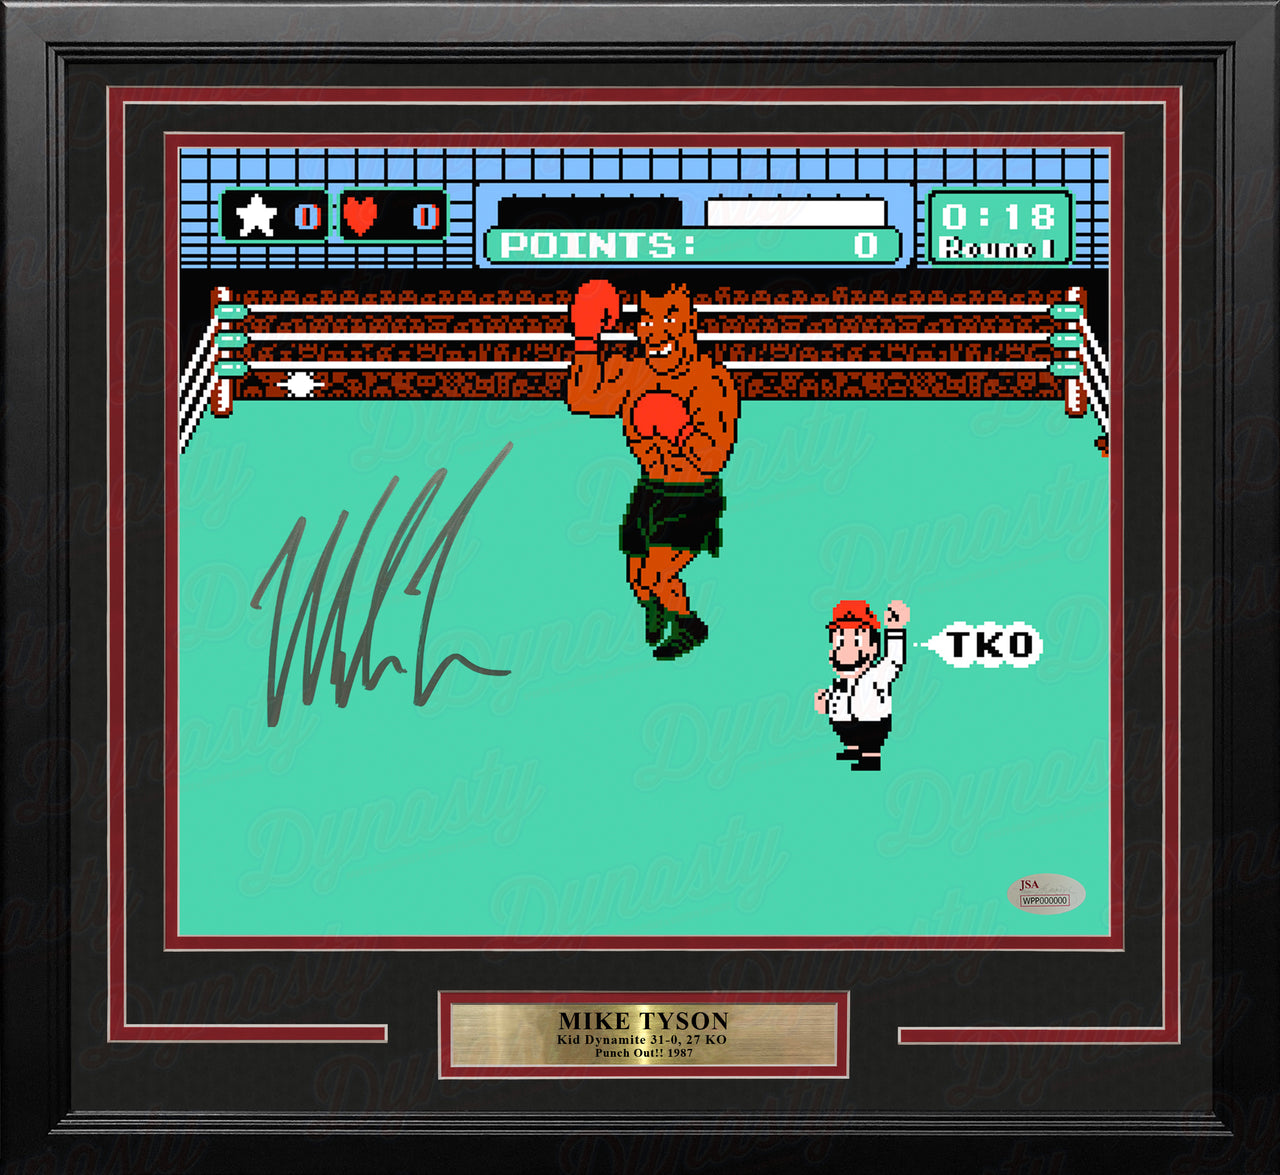 Mike Tyson Punch-Out!! Autographed 11" x 14" Framed Boxing Photo - Dynasty Sports & Framing 